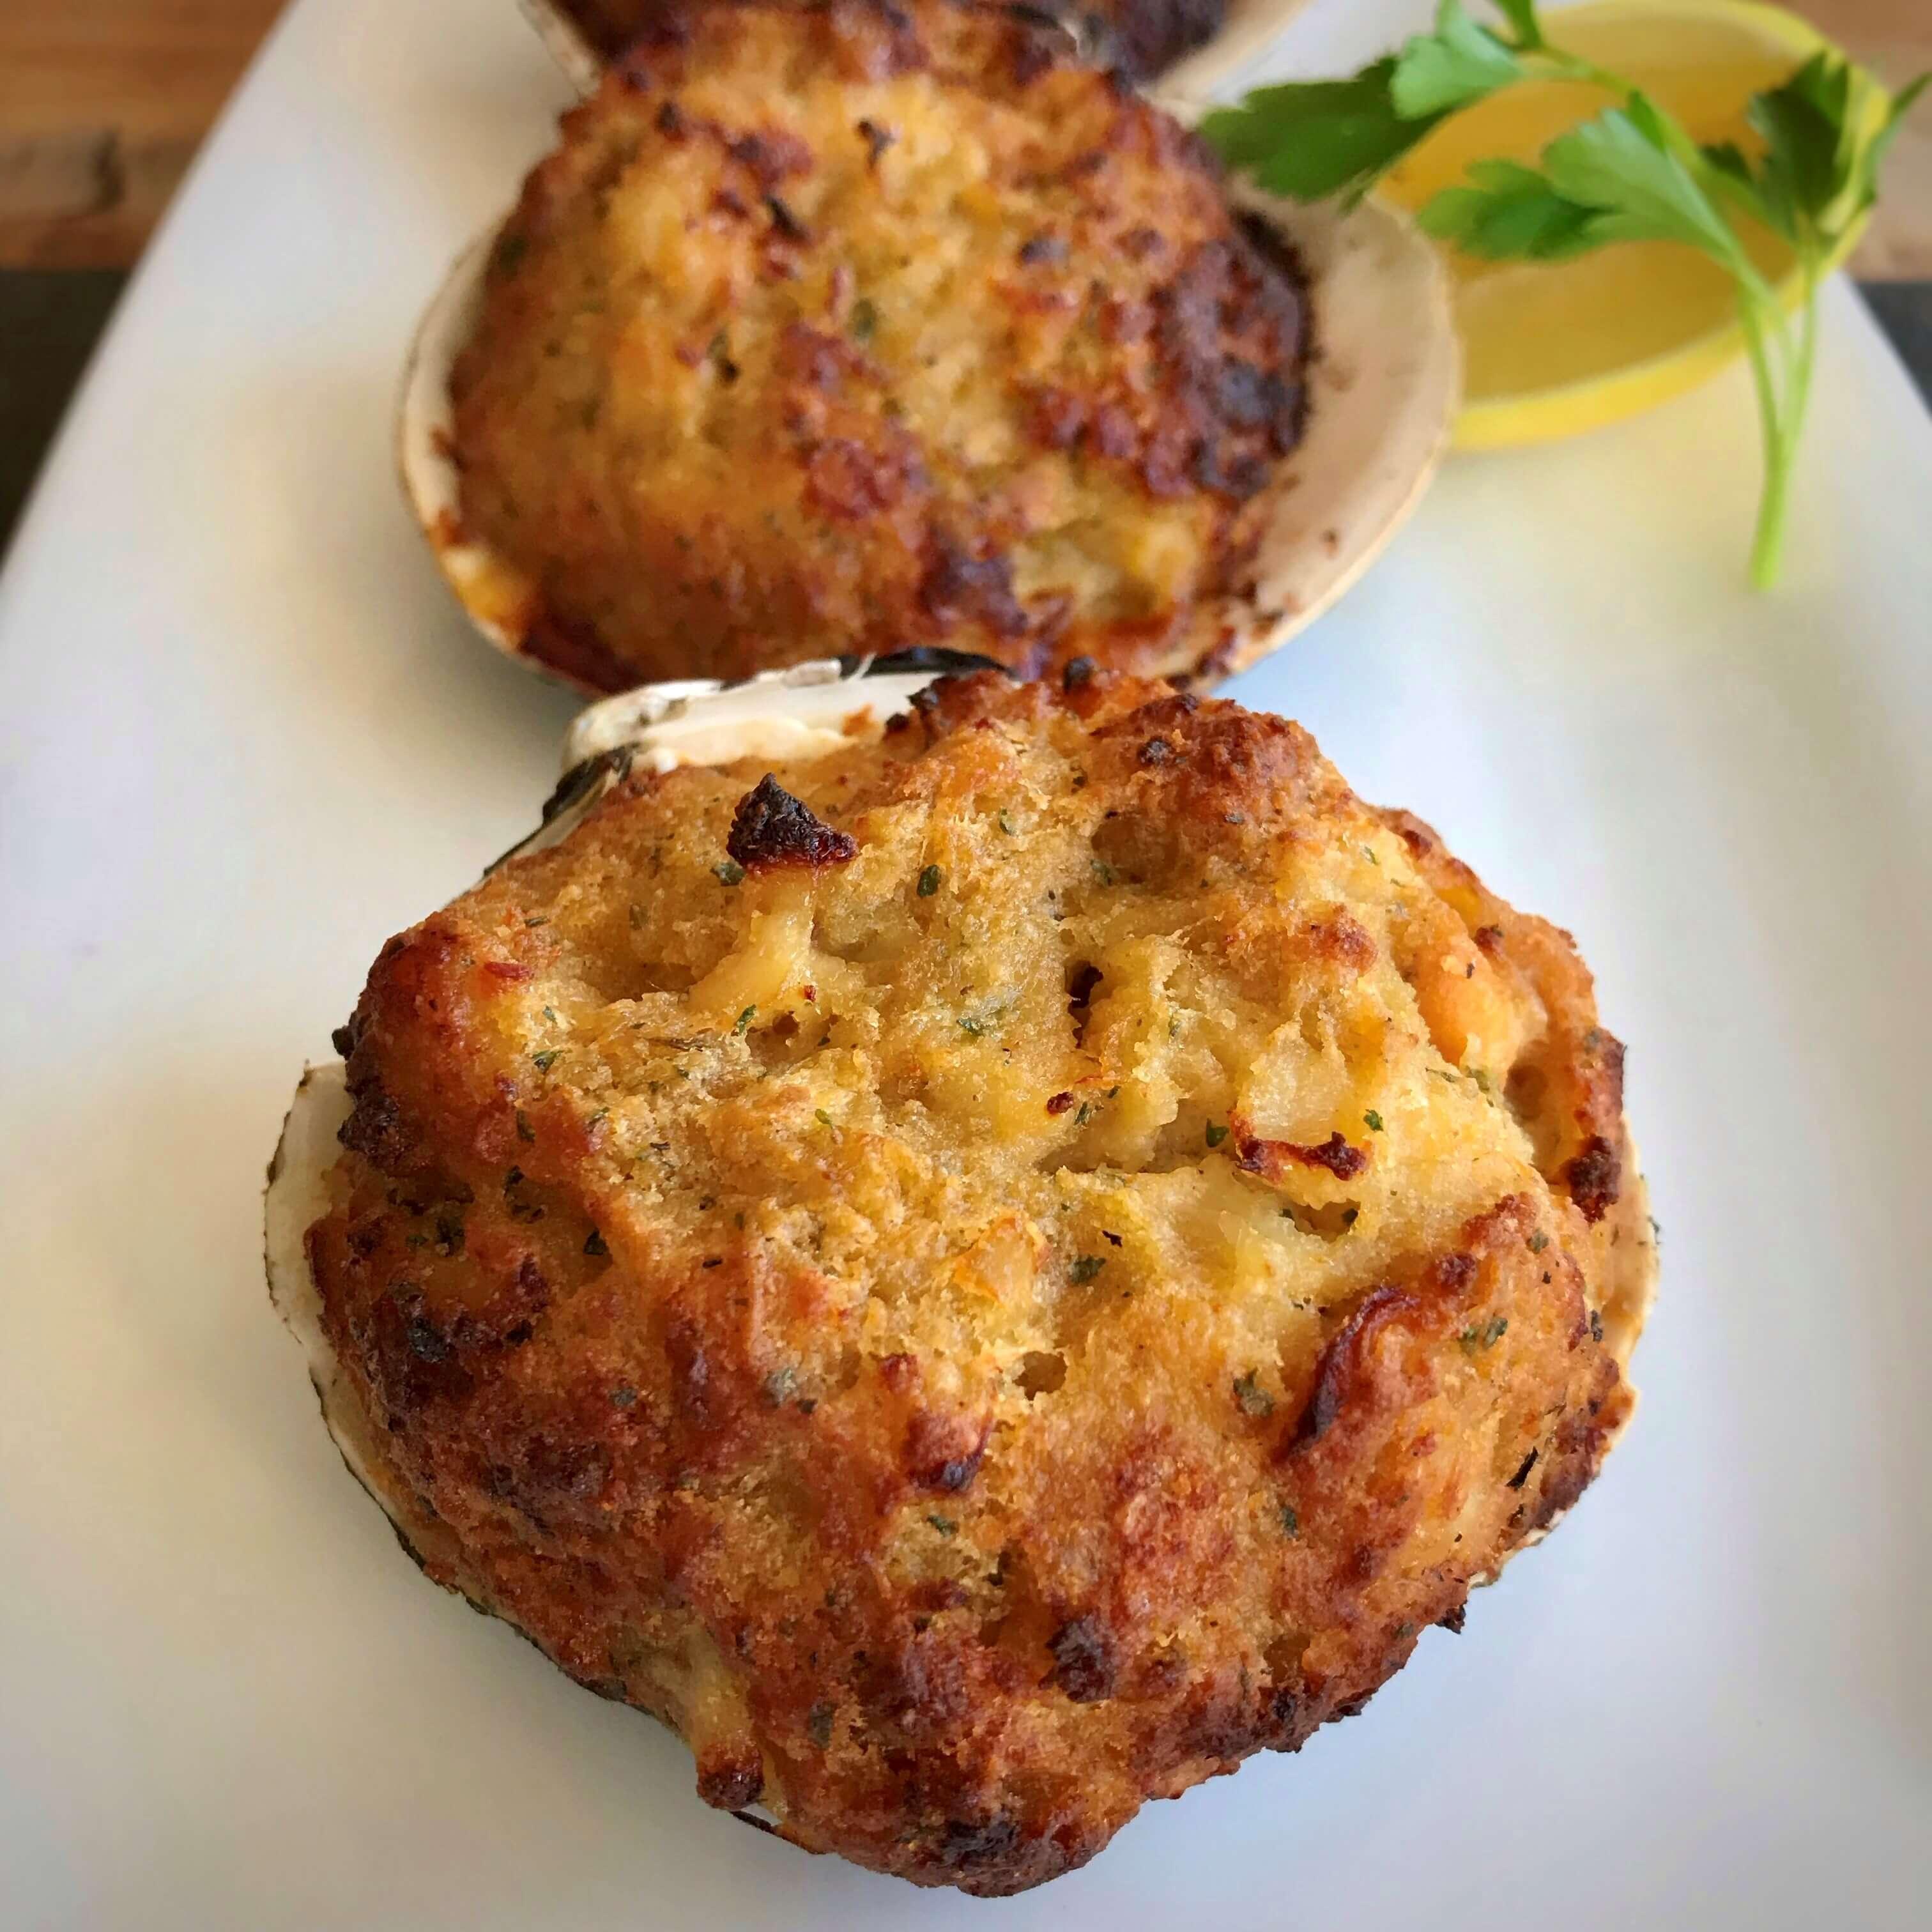 EASY DELICIOUS STUFFED CLAMS